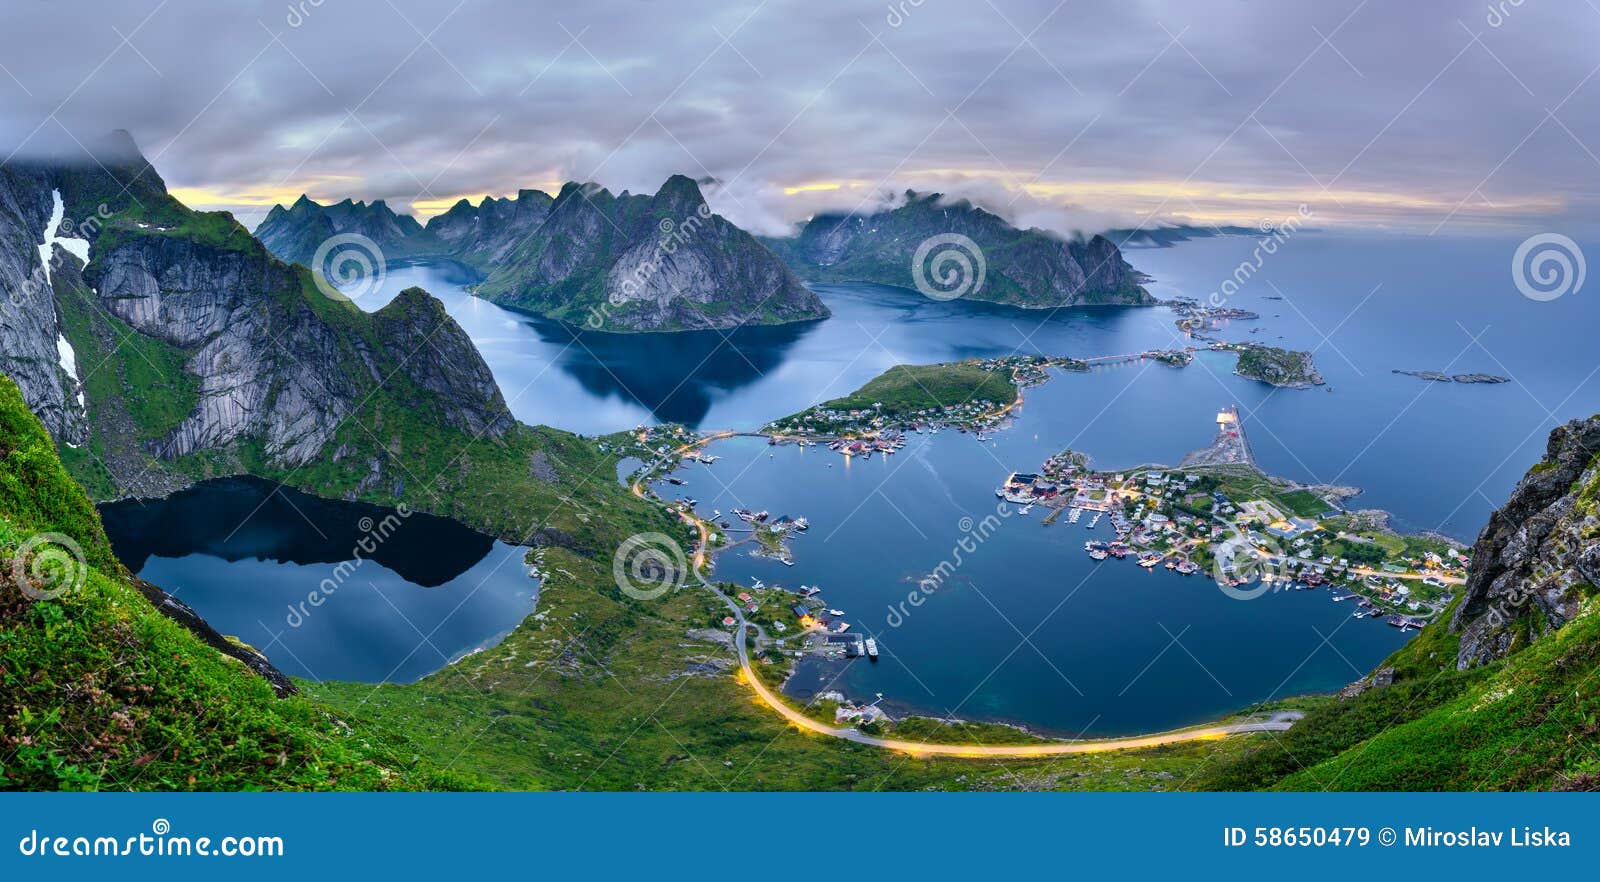 panorama of mountains and reine in lofoten islands, norway